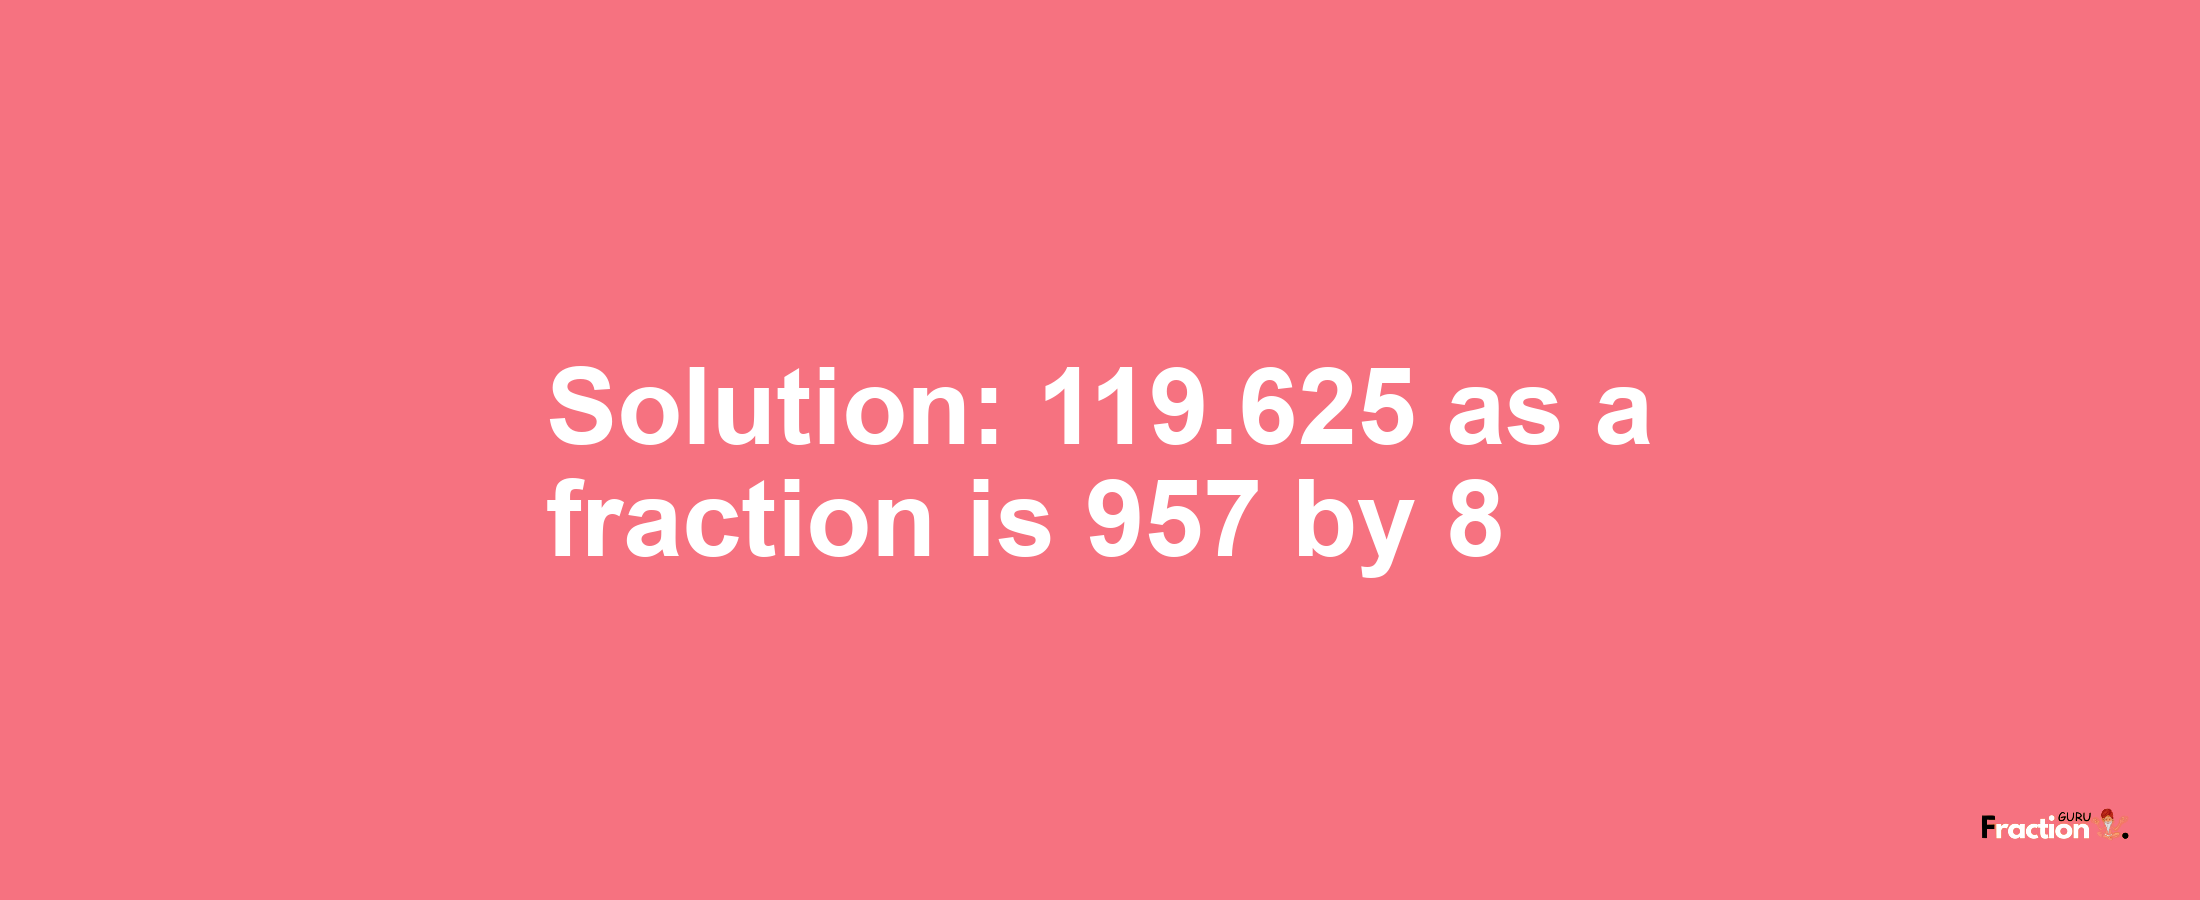 Solution:119.625 as a fraction is 957/8